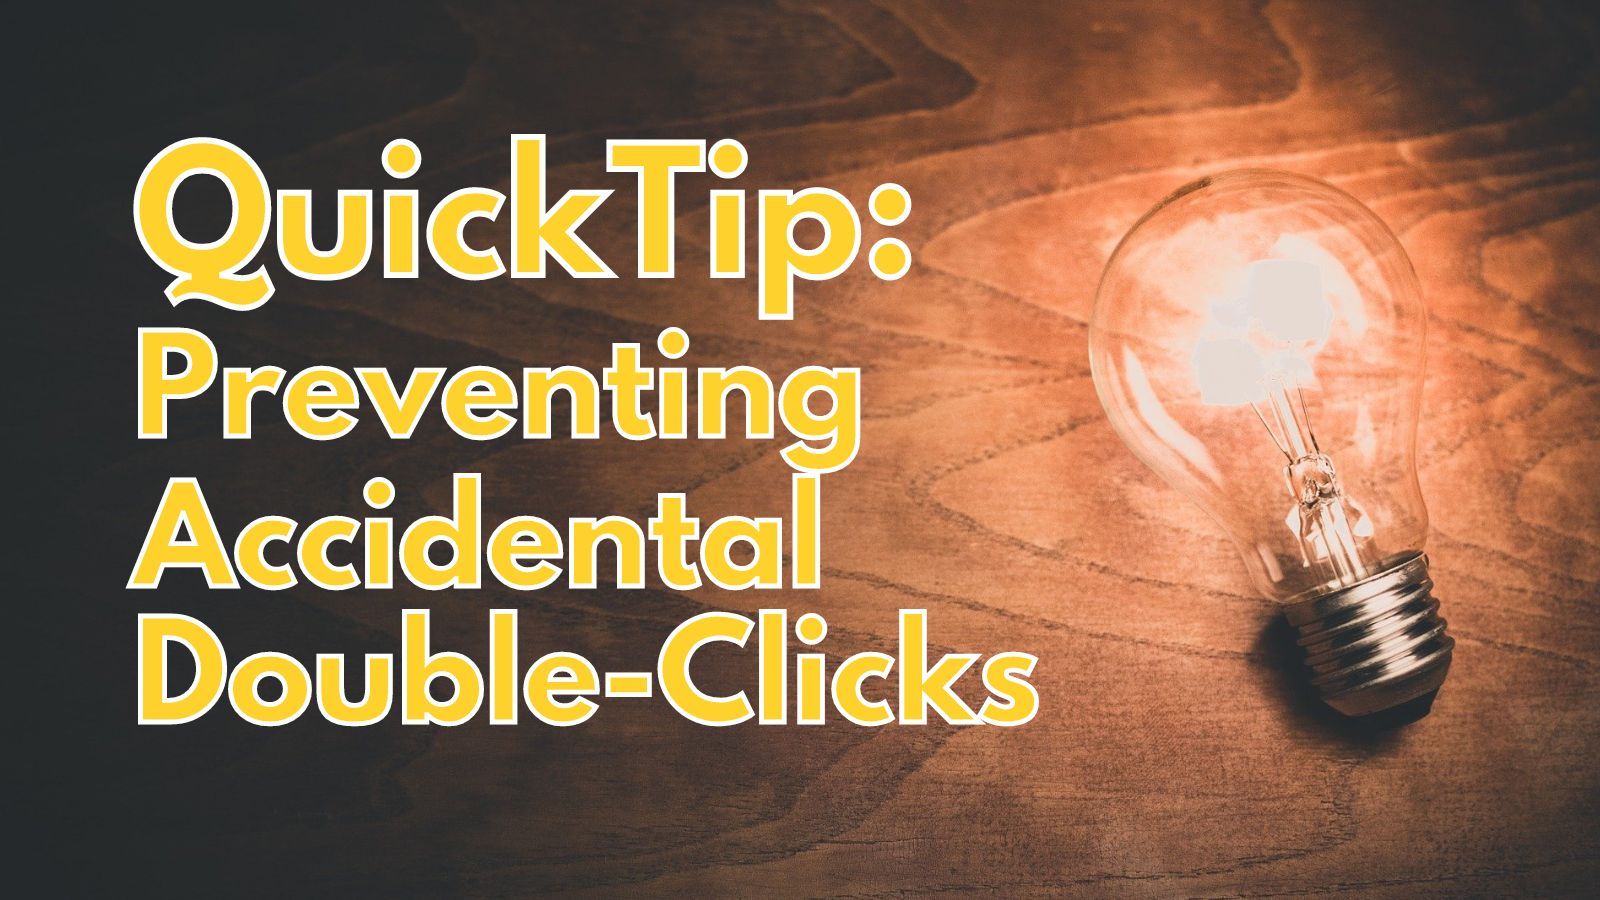 Quick Tip: Preventing Accidental Double-Clicks